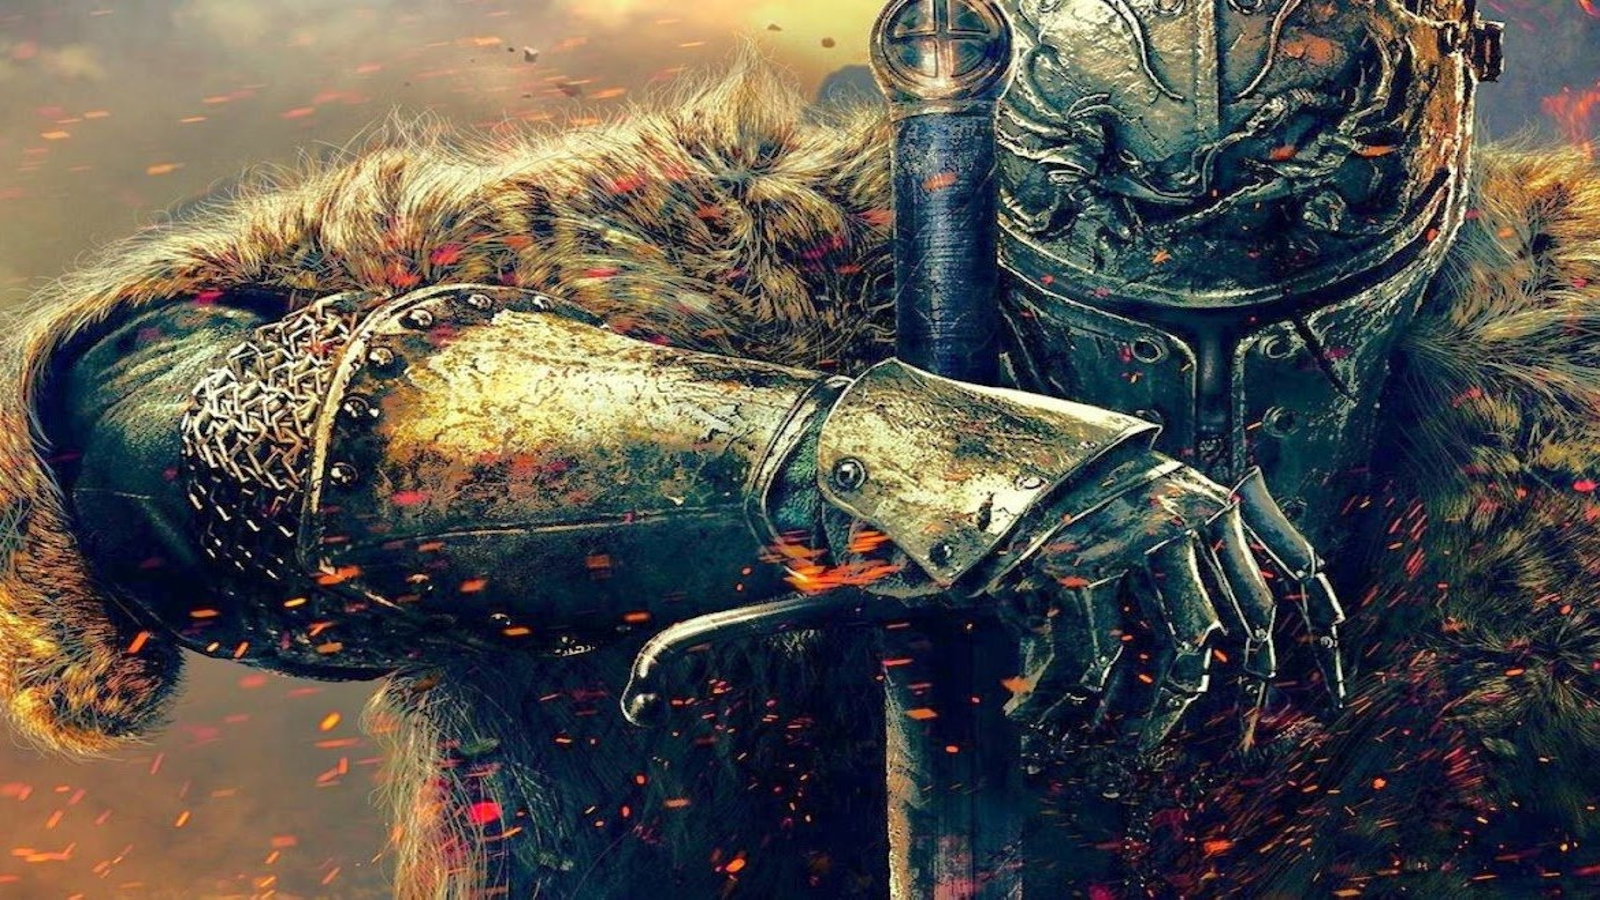 PC Users of Dark Souls: Scholar of the First Sin Getting Banned